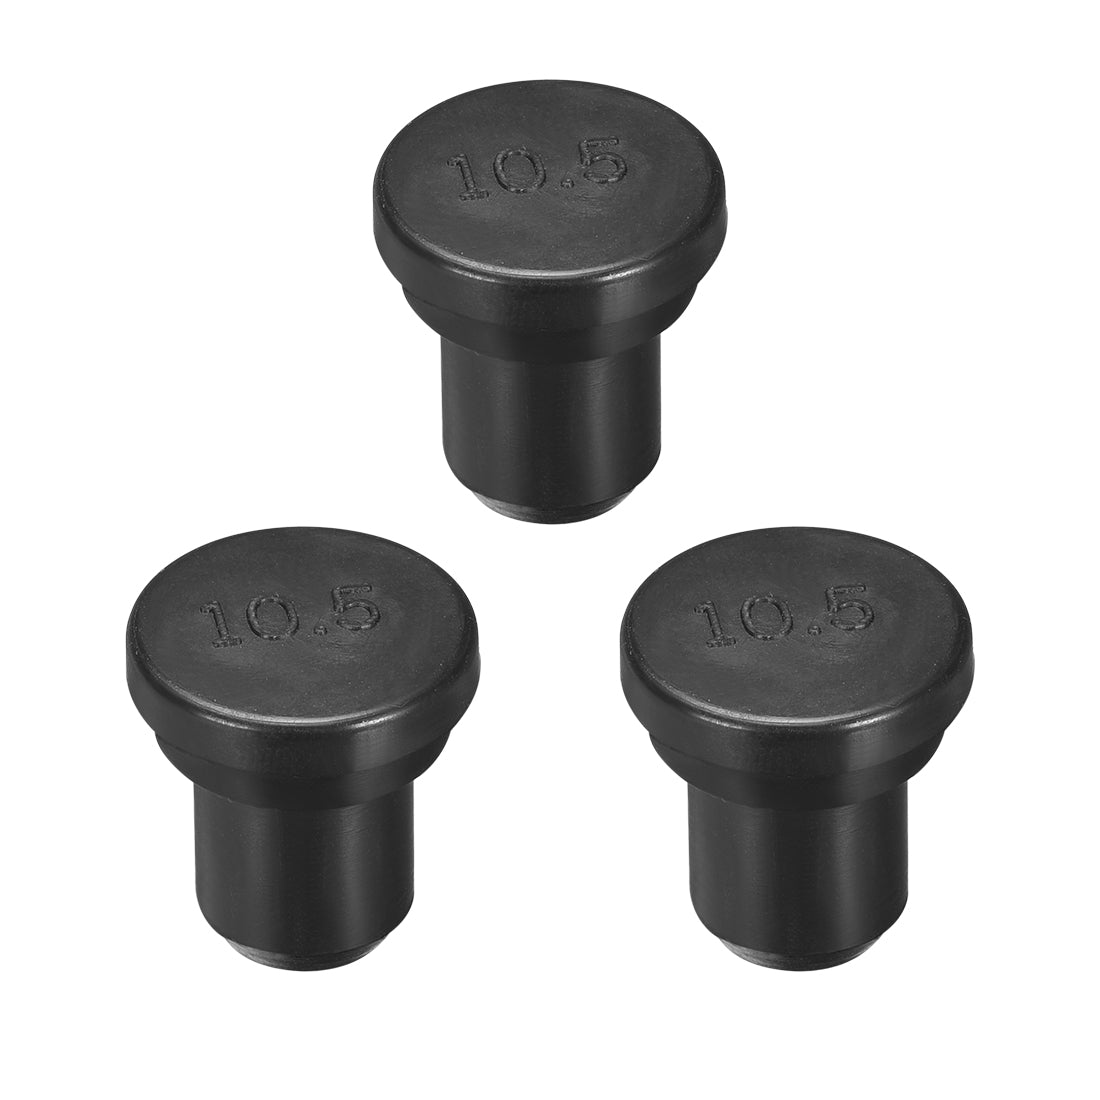 uxcell Uxcell Rubber Stopper , SPR-105 EPDM 10.5mm Dia Seal Hole Insert Stopper Black for Cable Gland , 3pcs